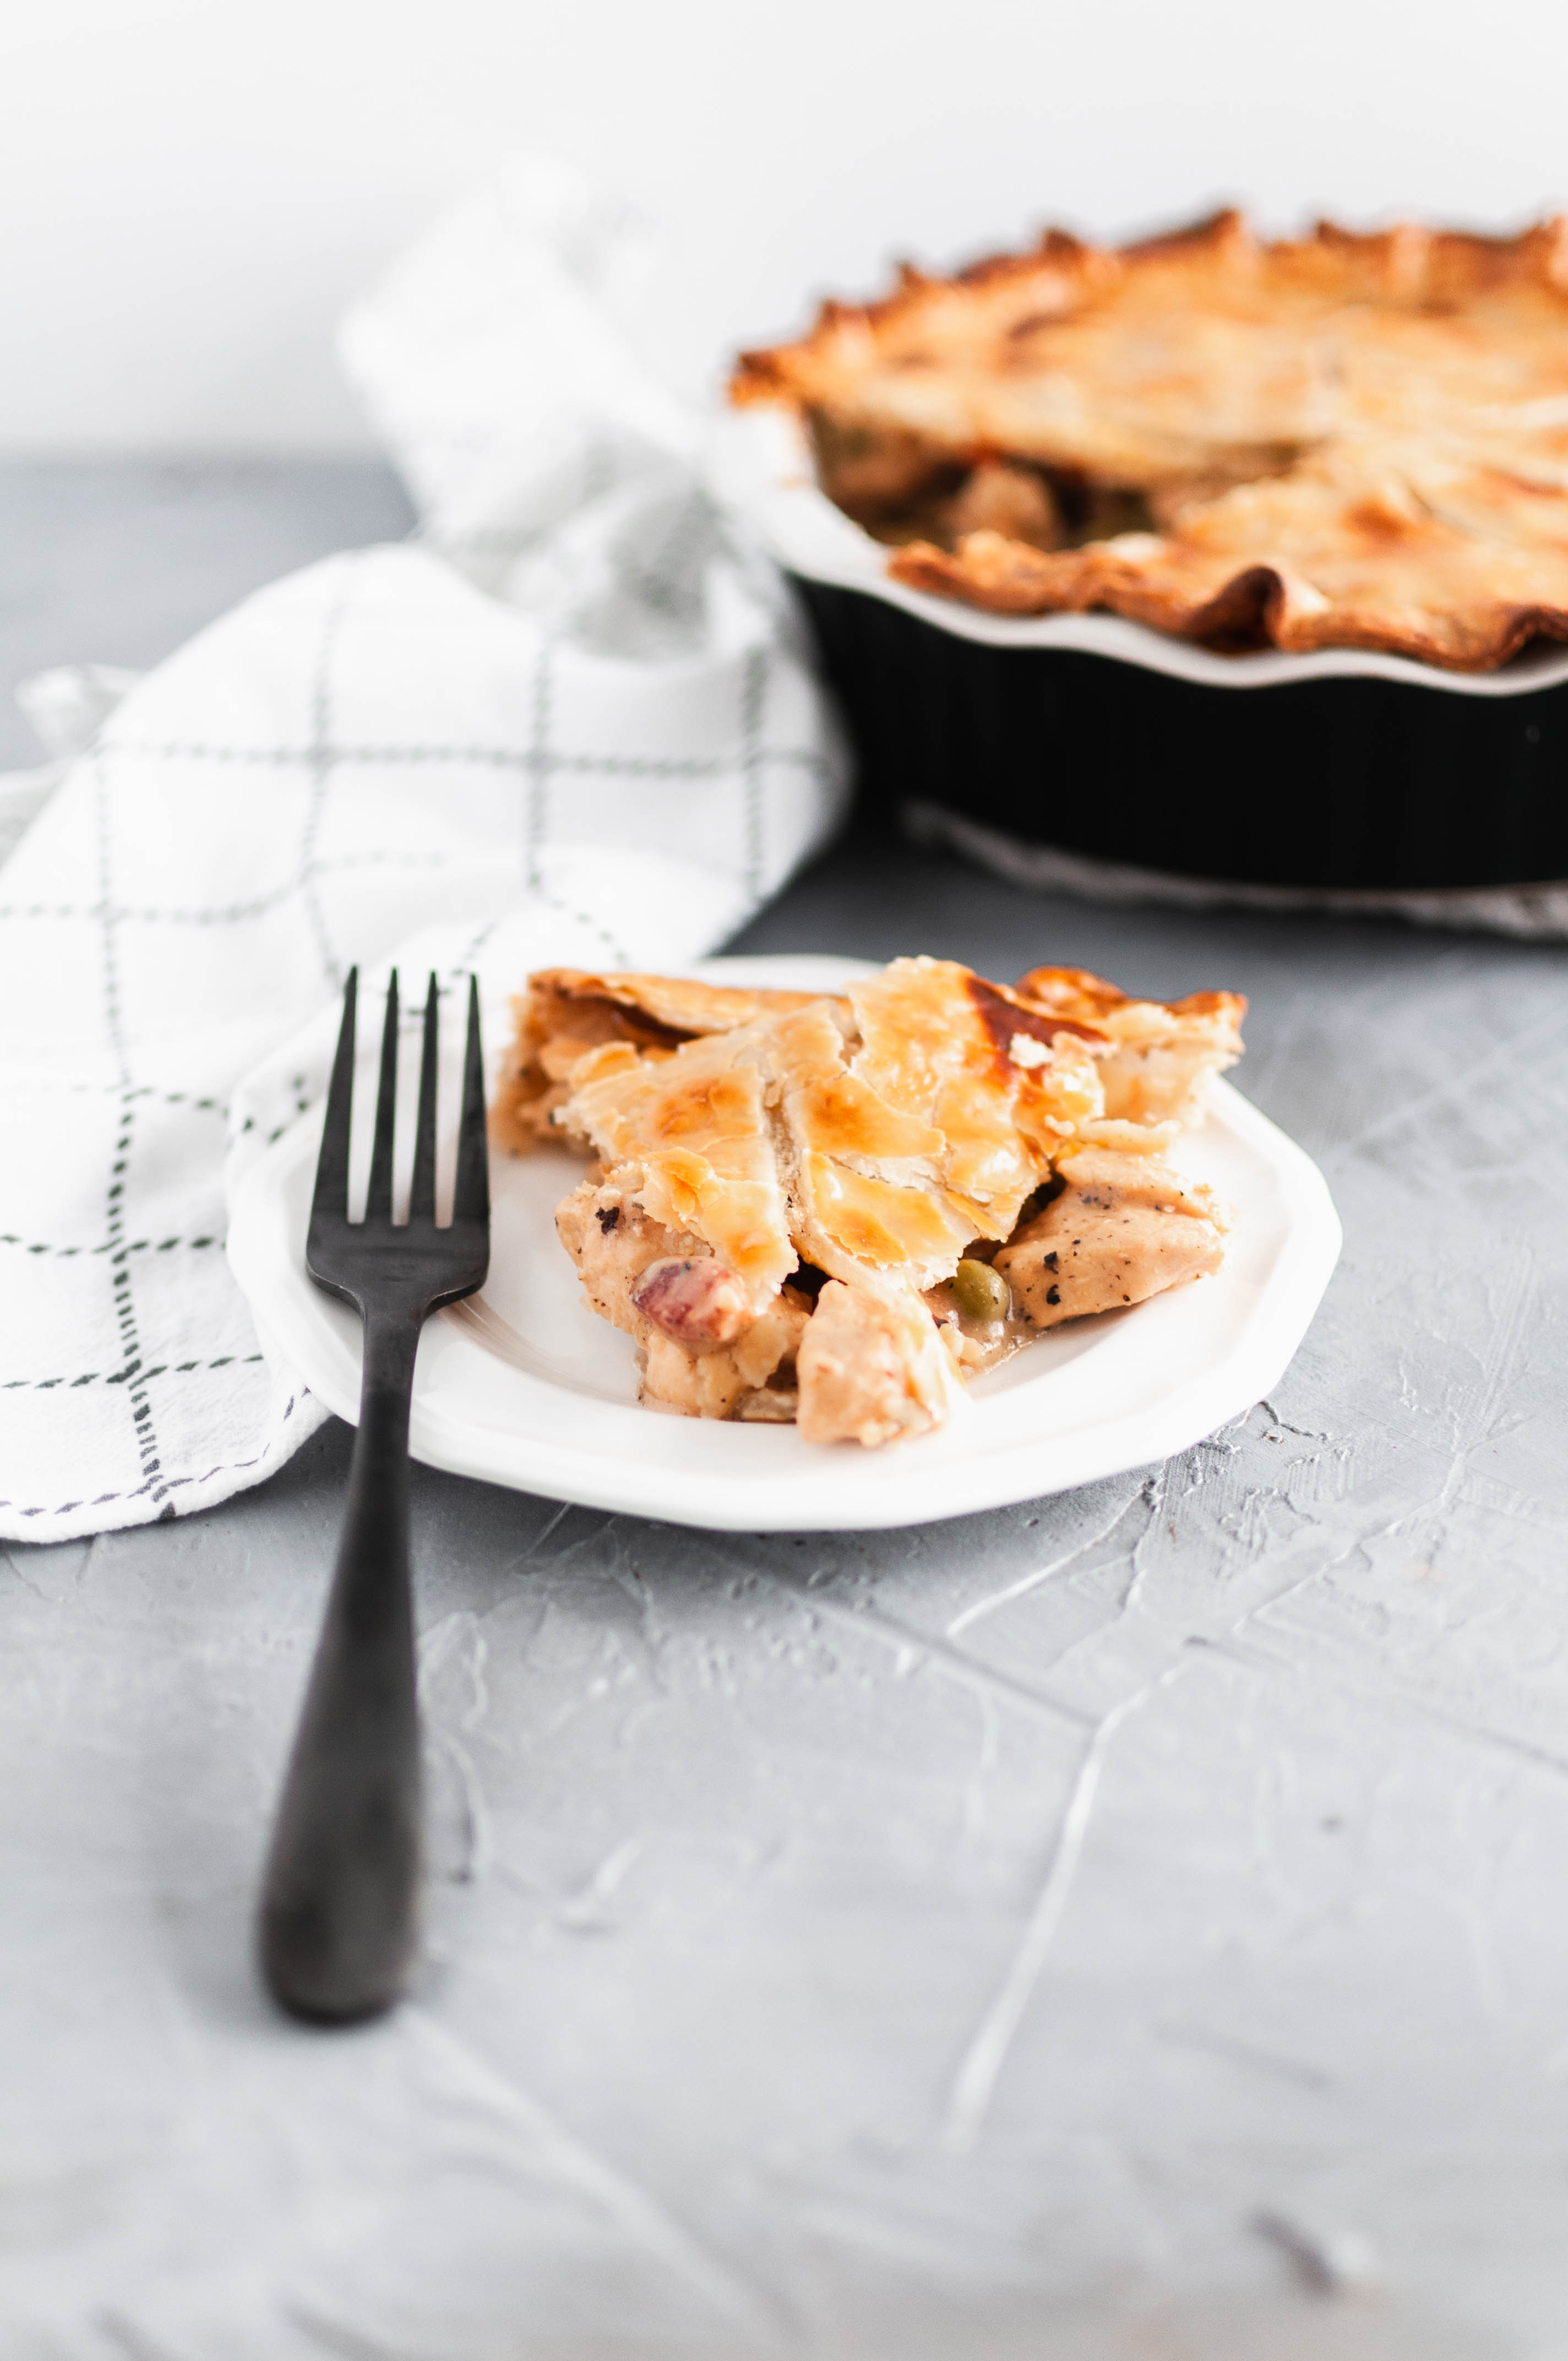 A twist on a comfort food classic, this Chicken Bacon Ranch Chicken Pot Pie will be perfect for fall. Store bought pie dough makes this doable for weeknights.